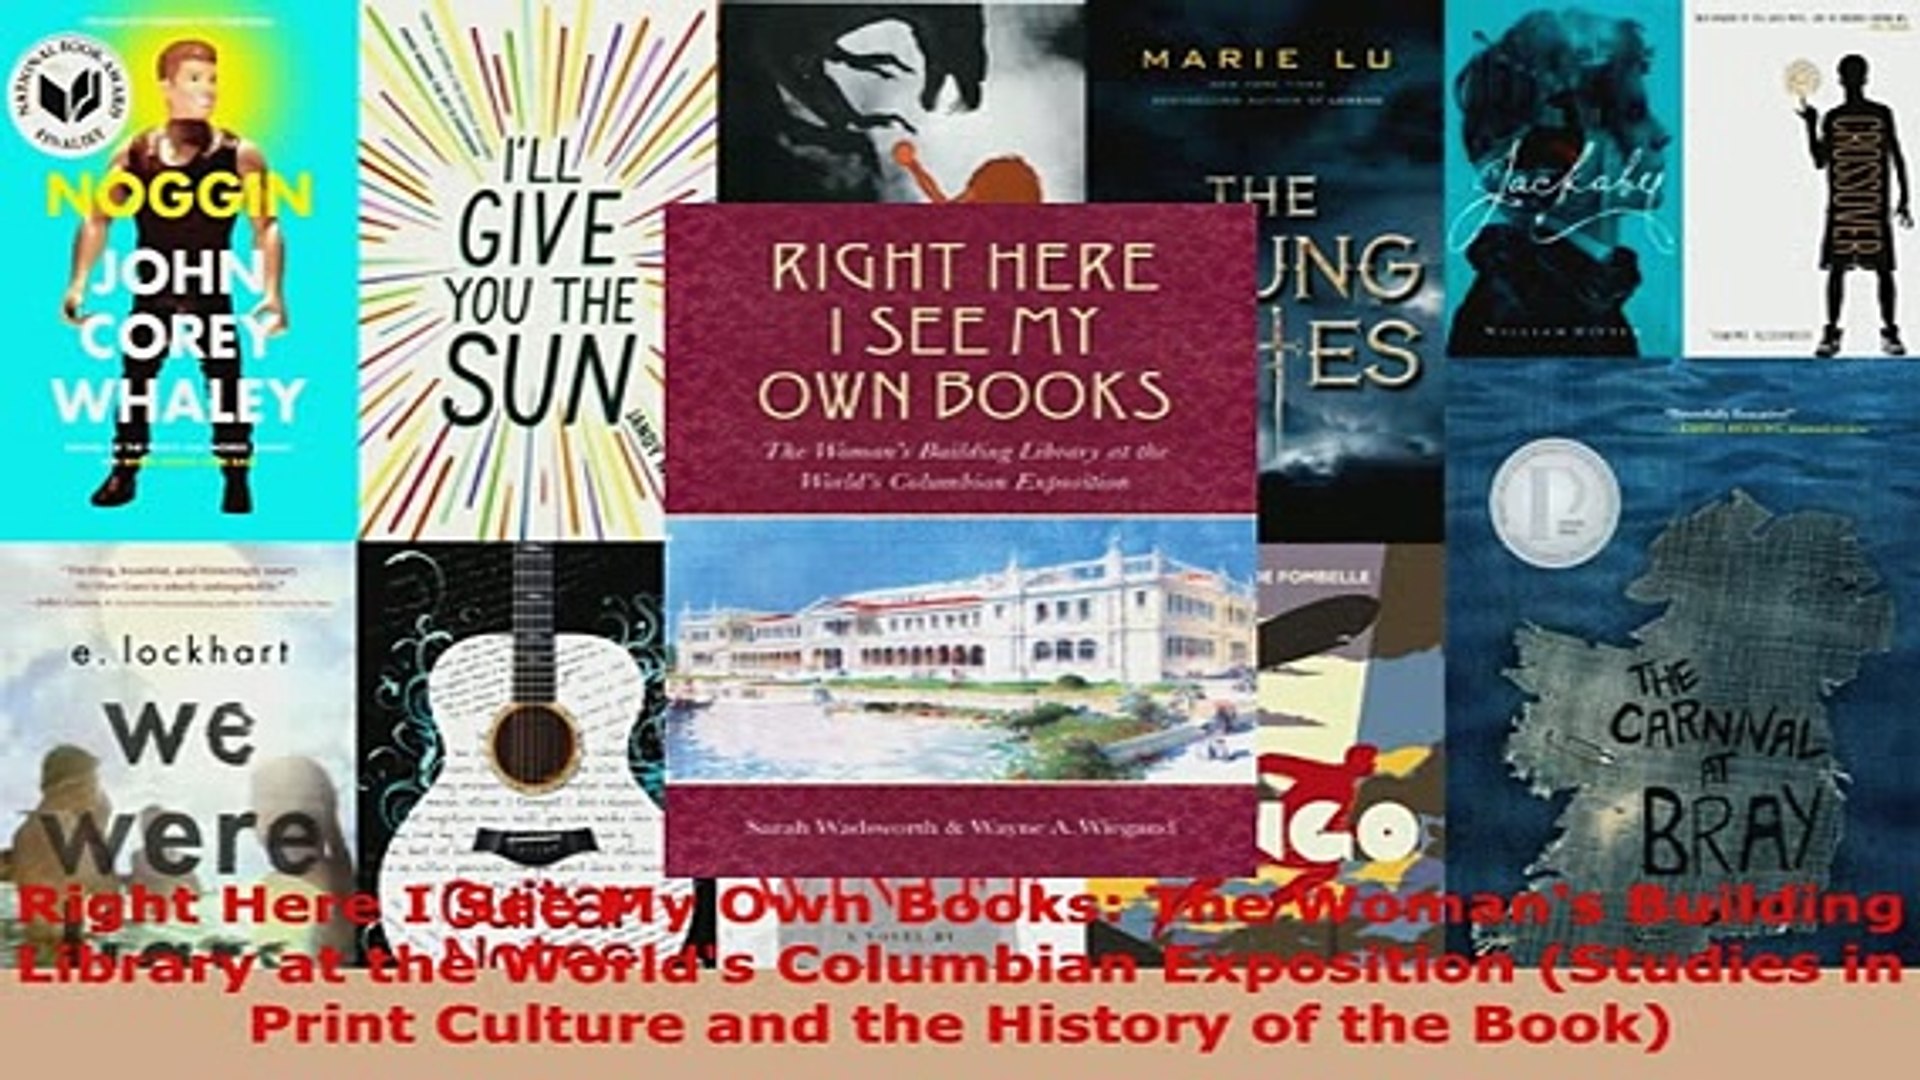 Pdf Right Here I See My Own Books The Womans Building Library At The Worlds Columbian Read Full Ebook Video Dailymotion - the ultimate roblox book an unofficial guide pdf